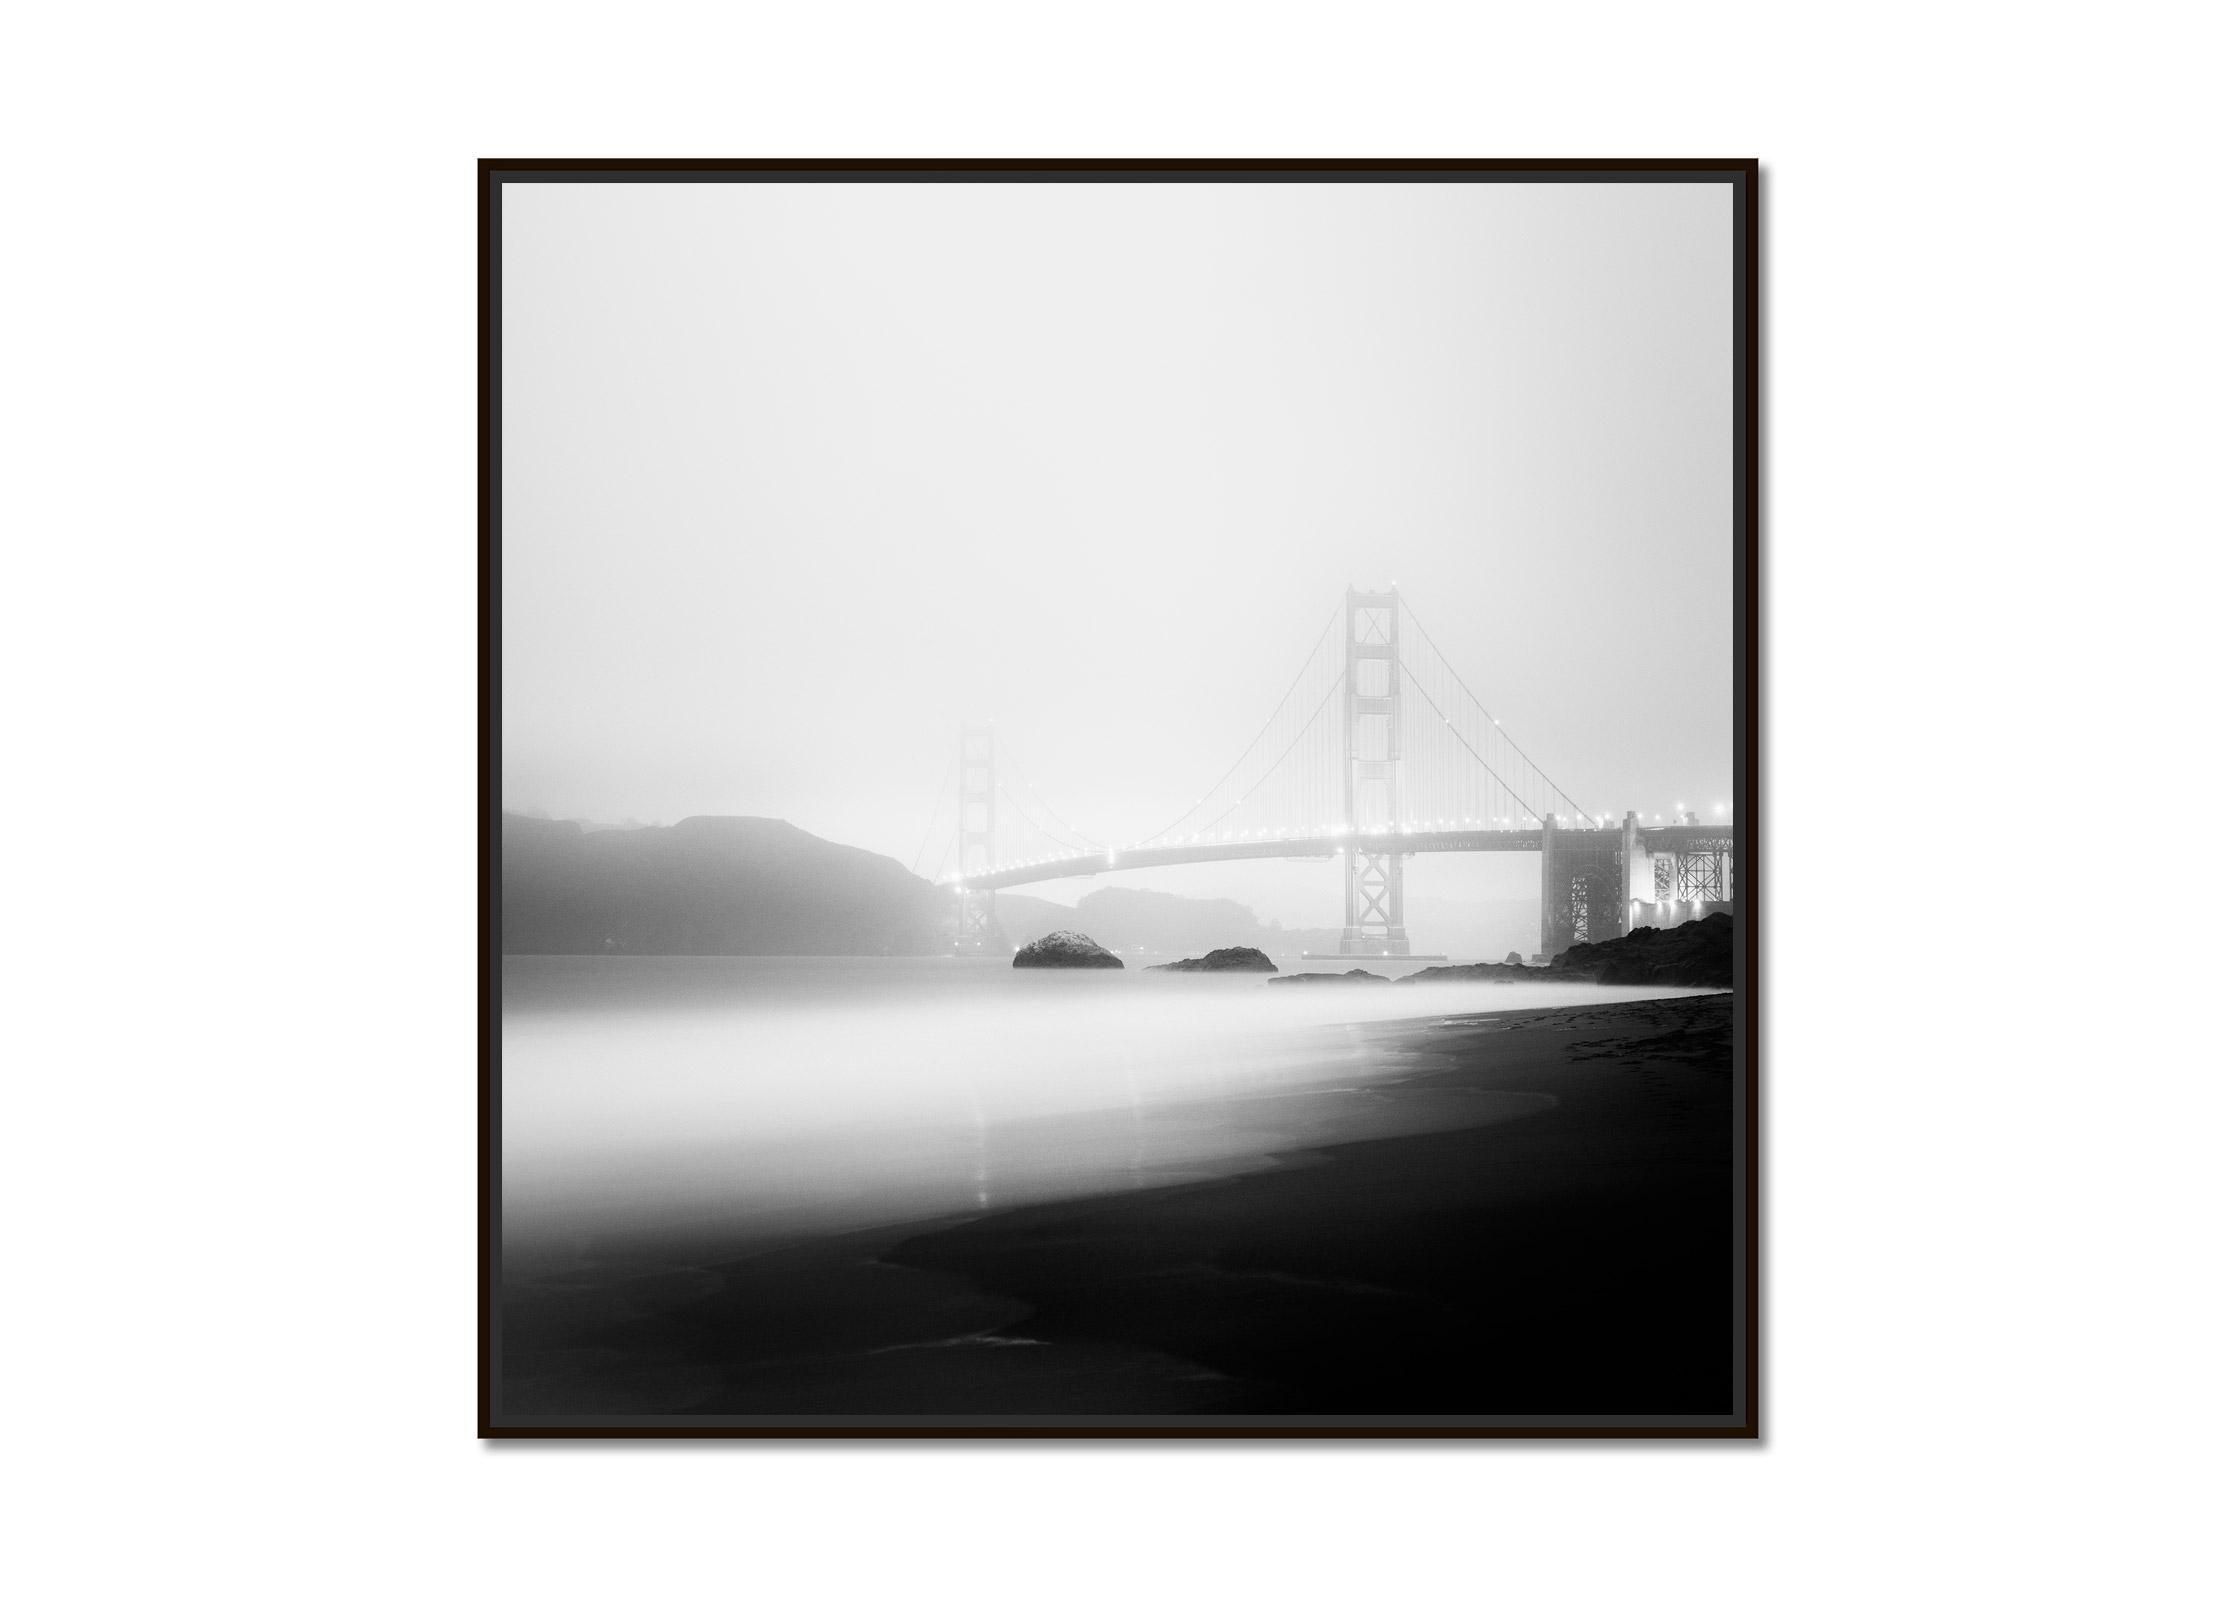 Golden Gate Bridge, foggy, night, USA, black and white photography, landscape - Photograph by Gerald Berghammer